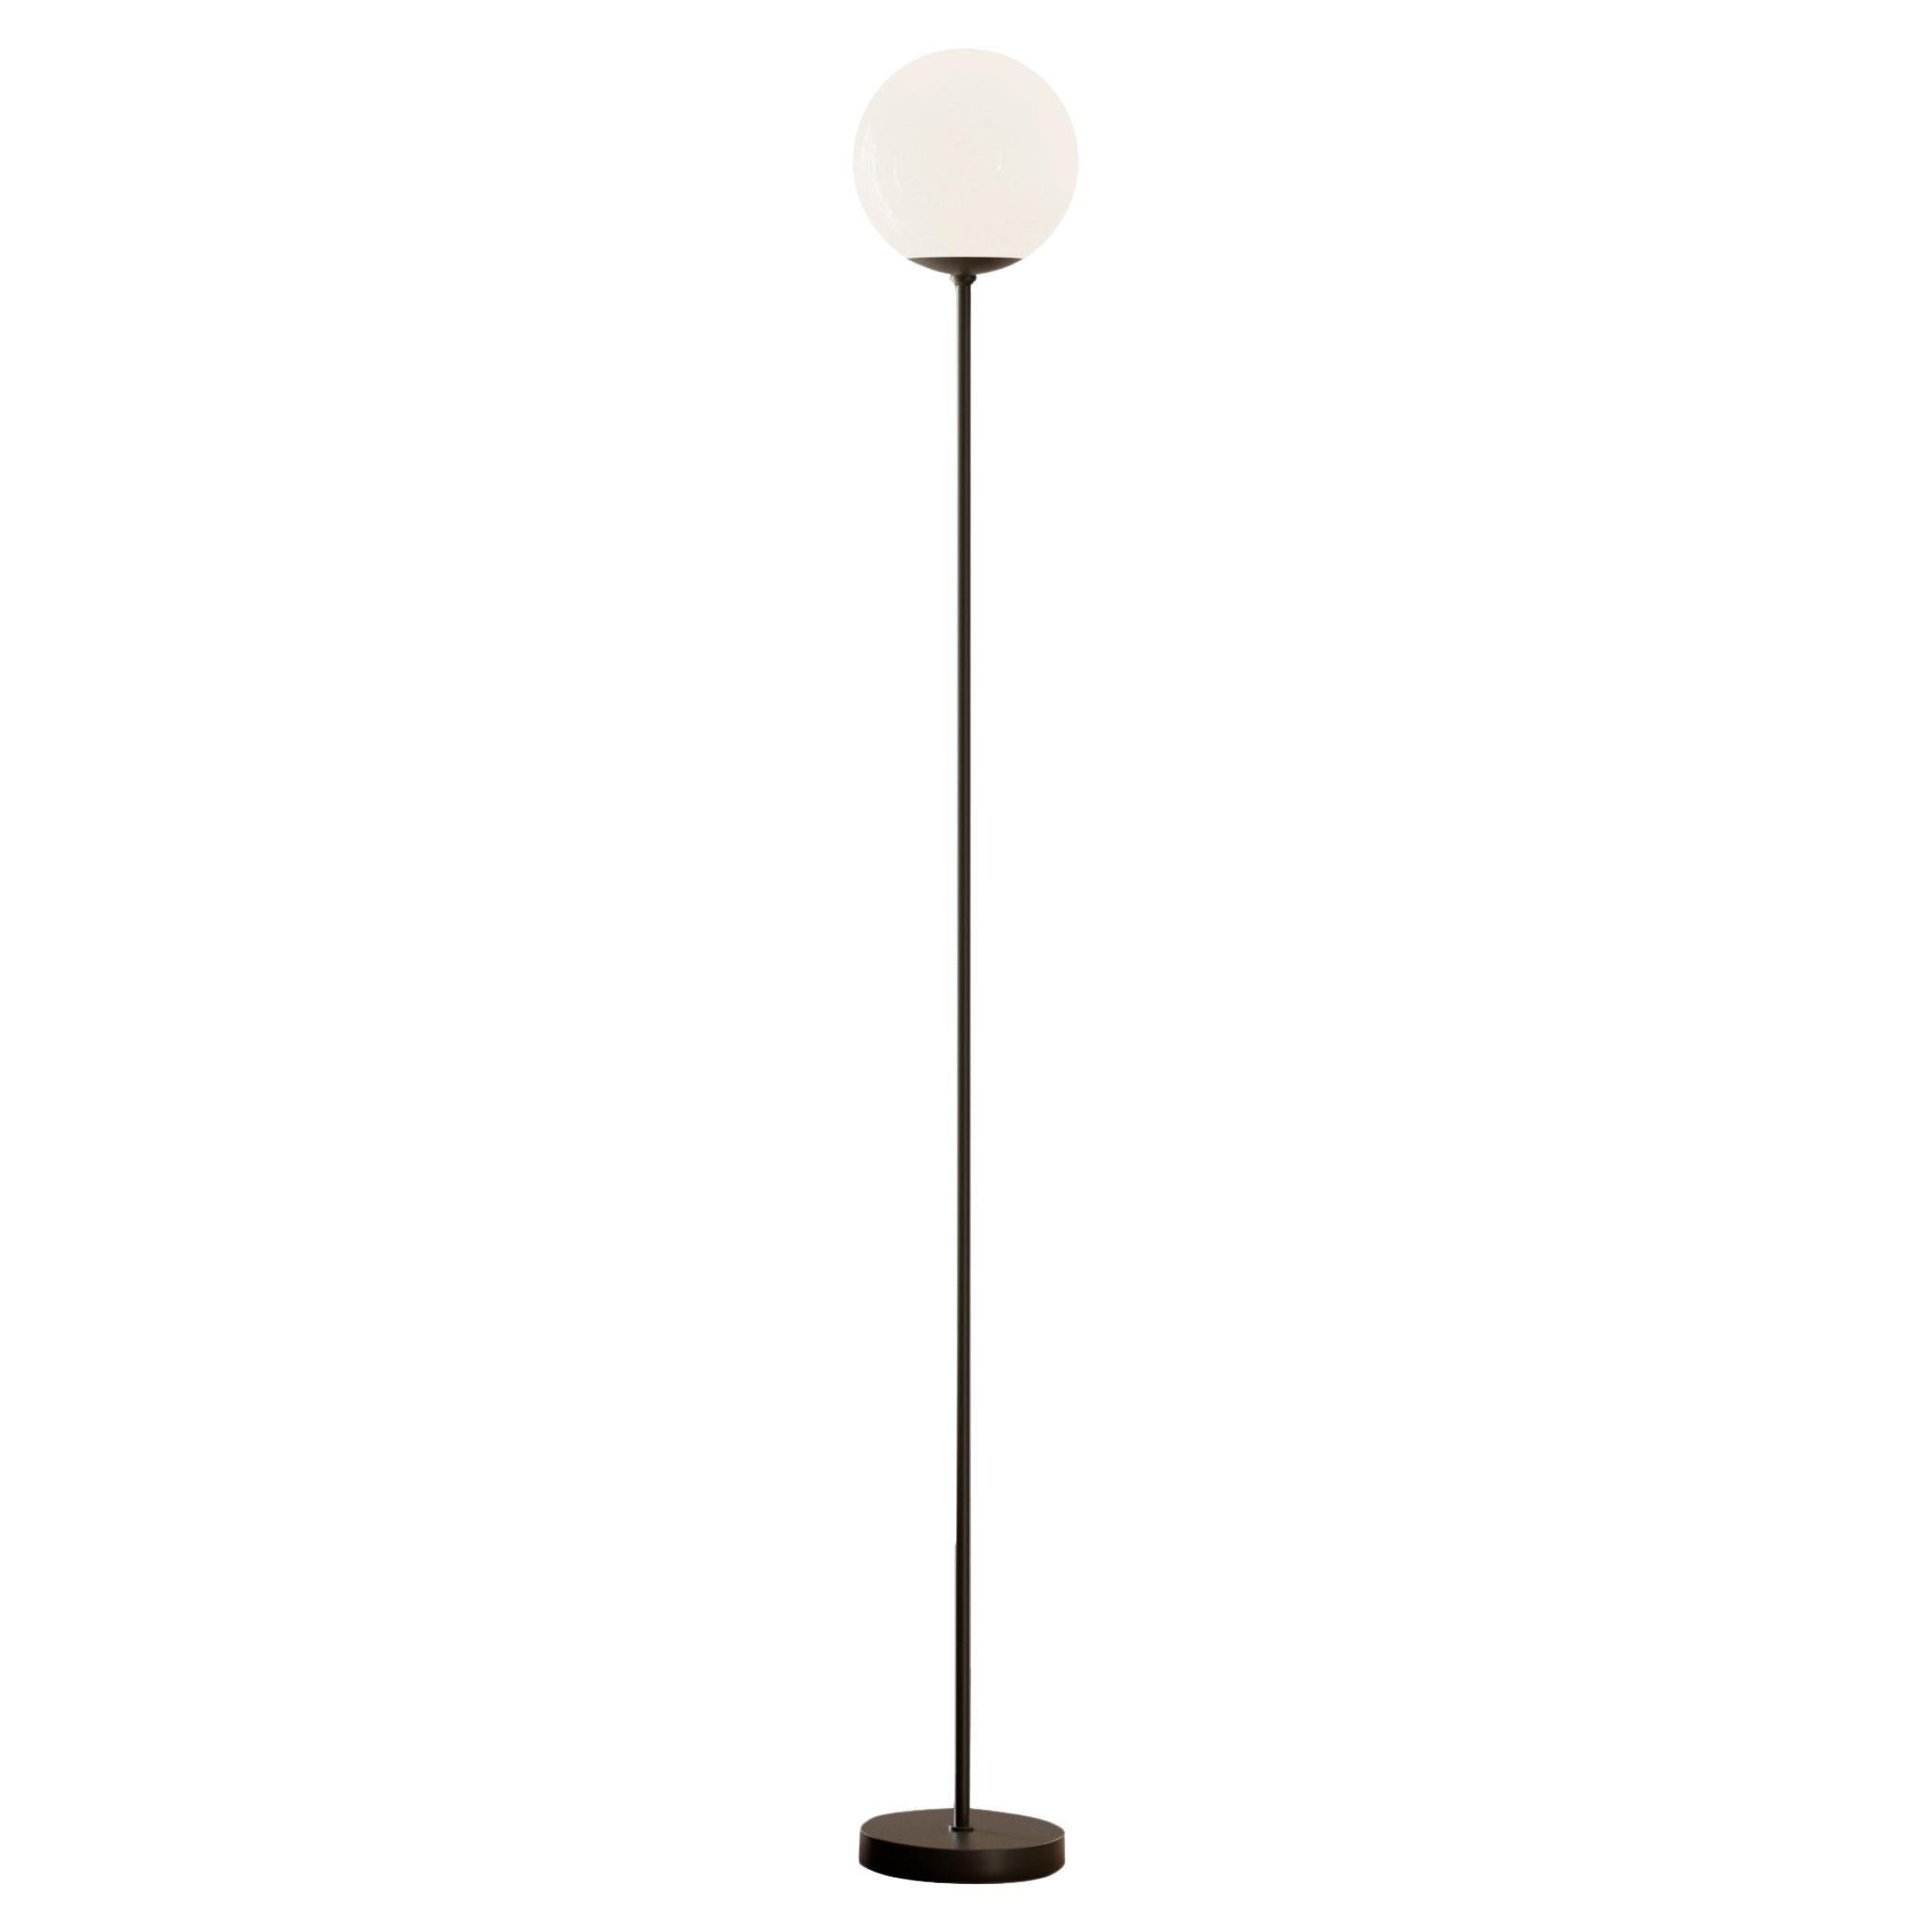 Gino Sarfatti Model 1081 Floor Lamp for Astep For Sale